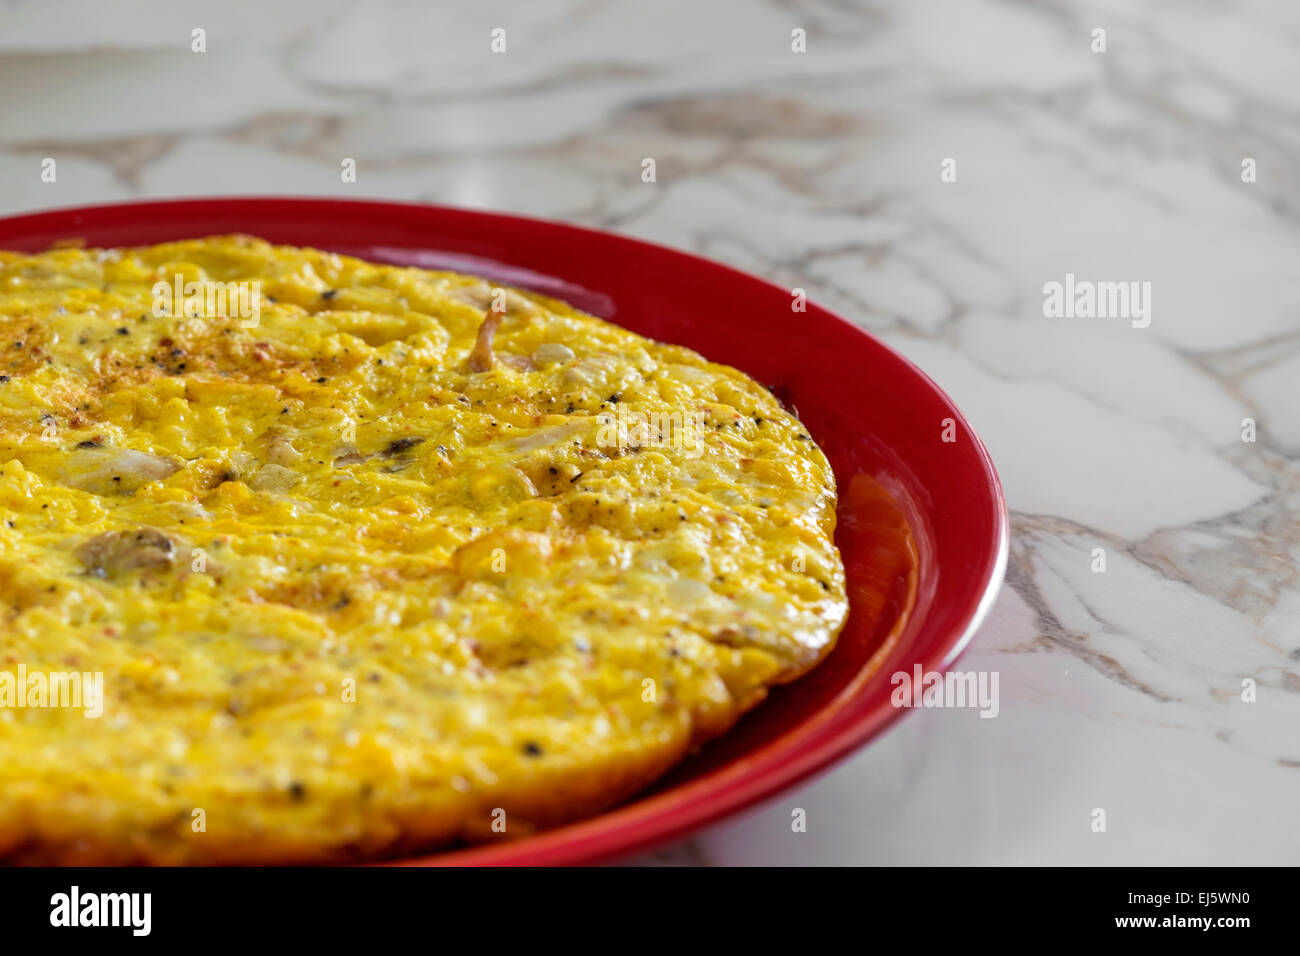 Omelet with cheese on a red plate Stock Photo